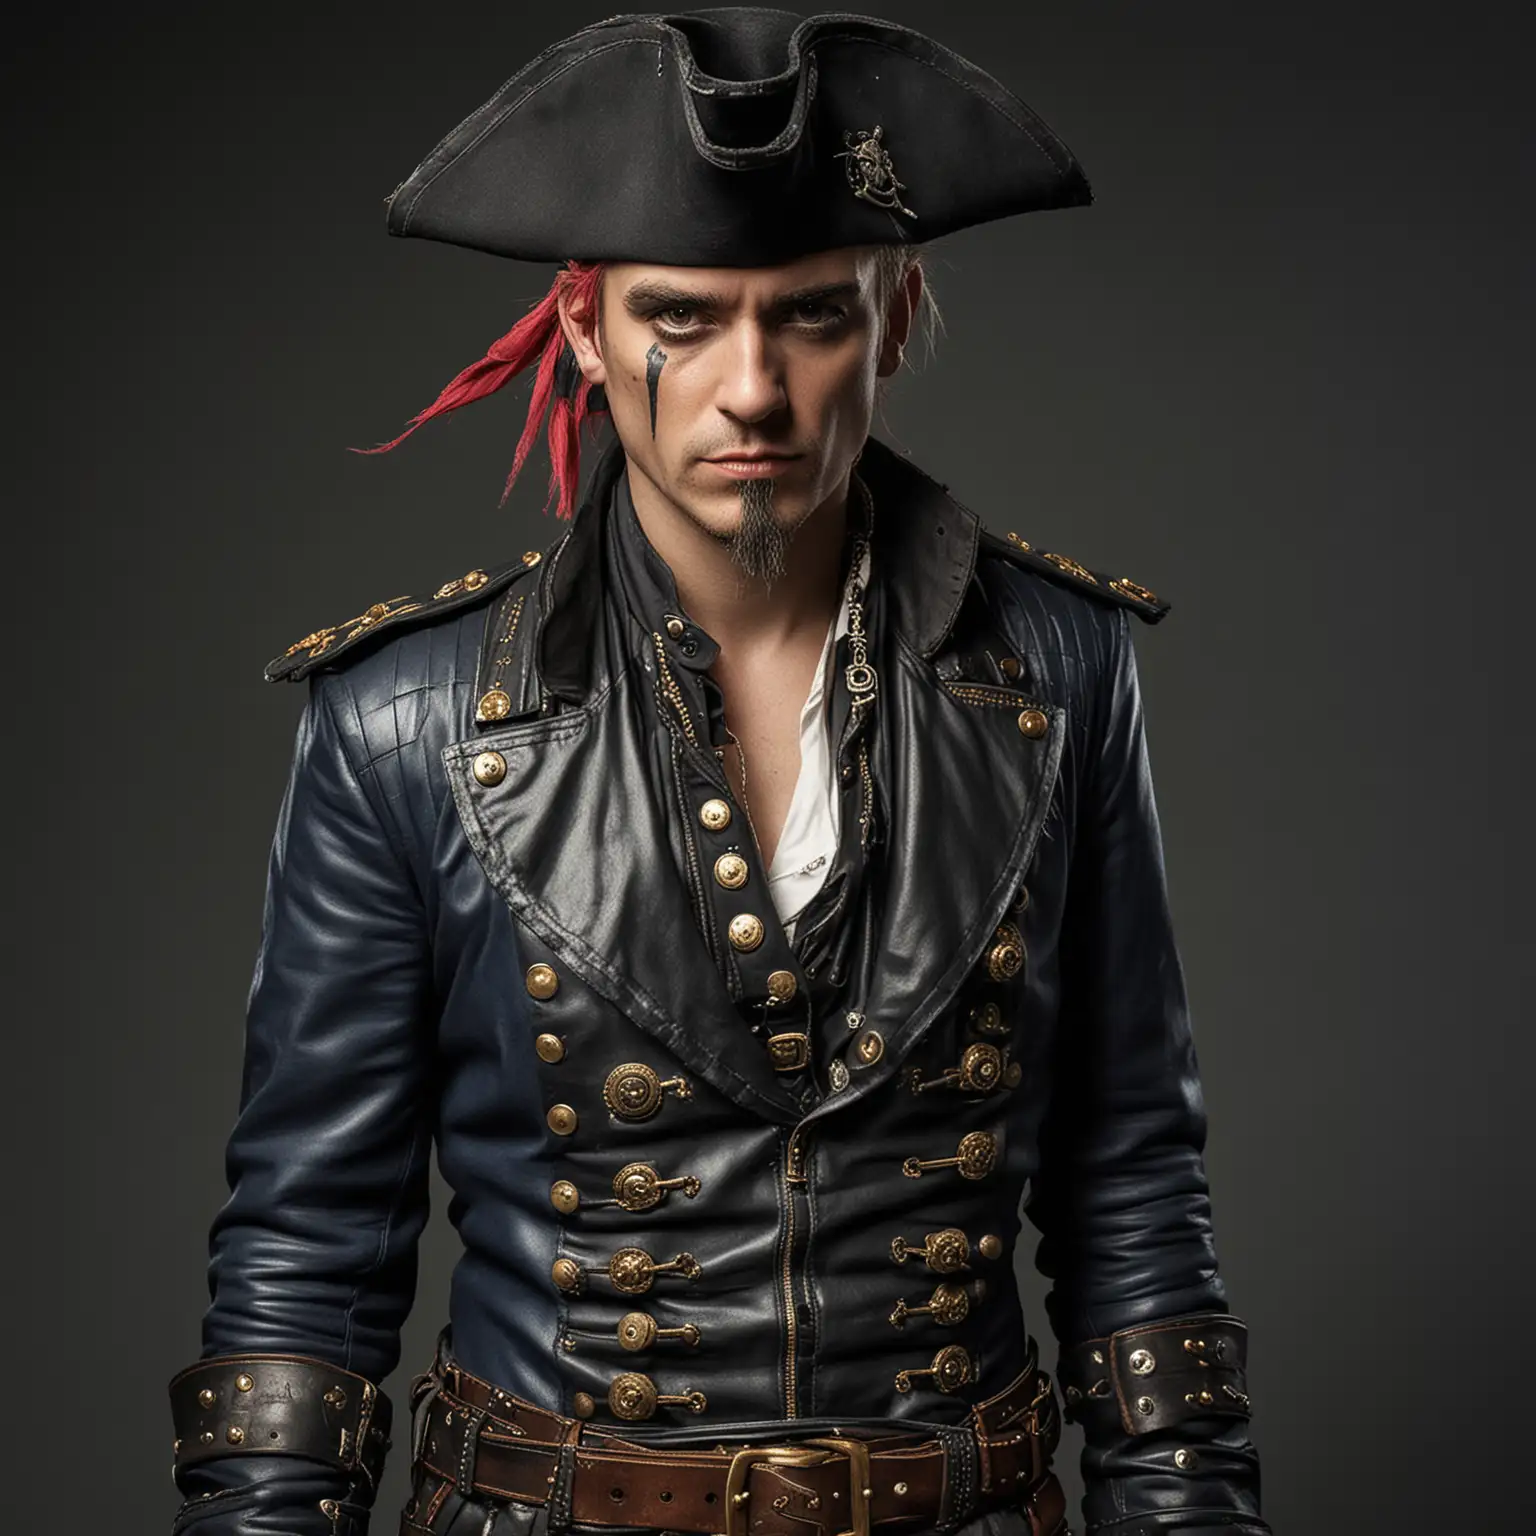 Punk Pirate in Naval Officer Leathers Rebellious Seafaring Fusion